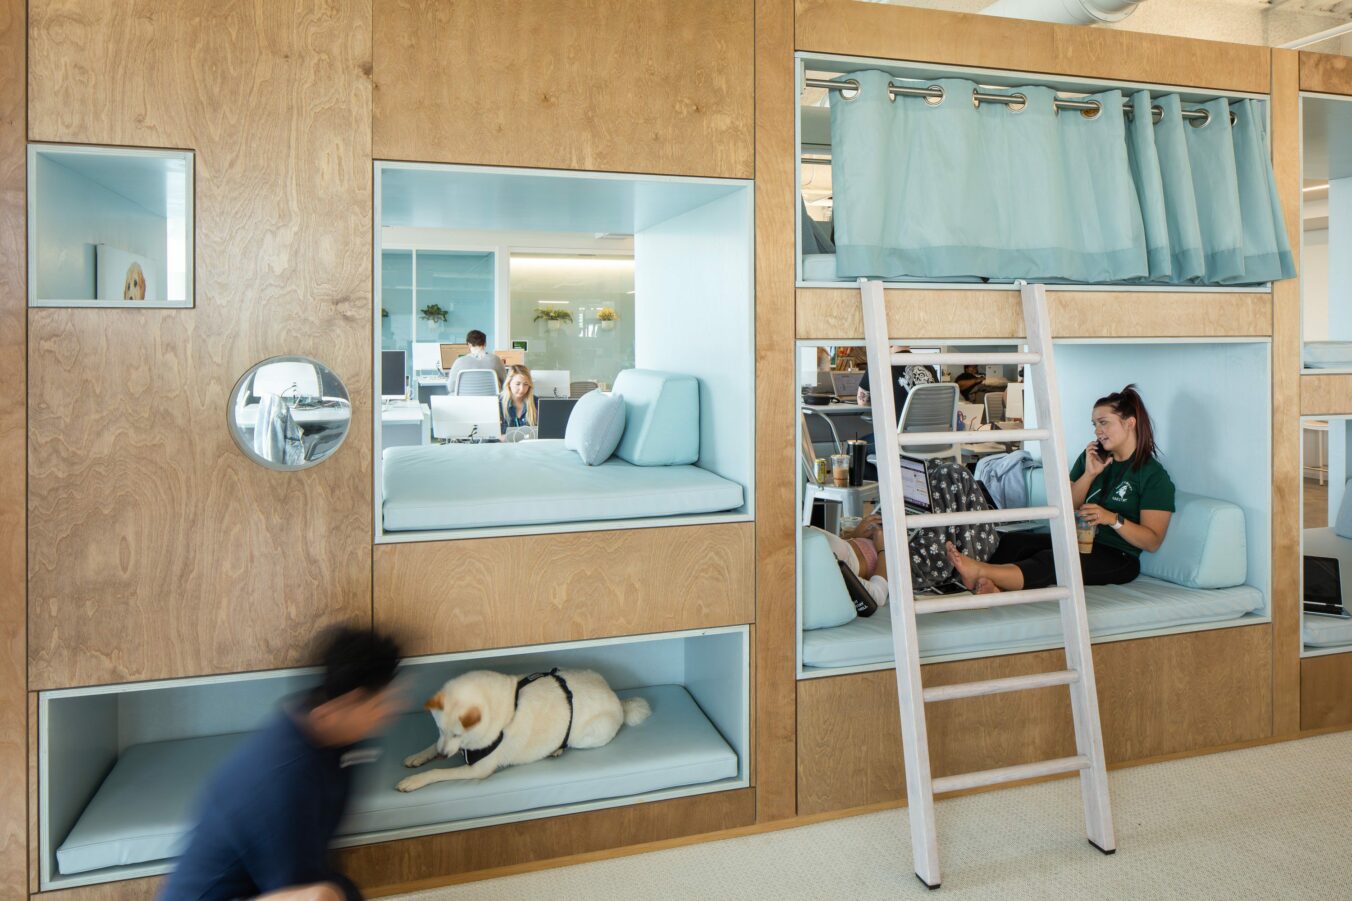 Employees and dogs enjoy cubbie spaces at Bark + Co. after the commercial interiors construction work